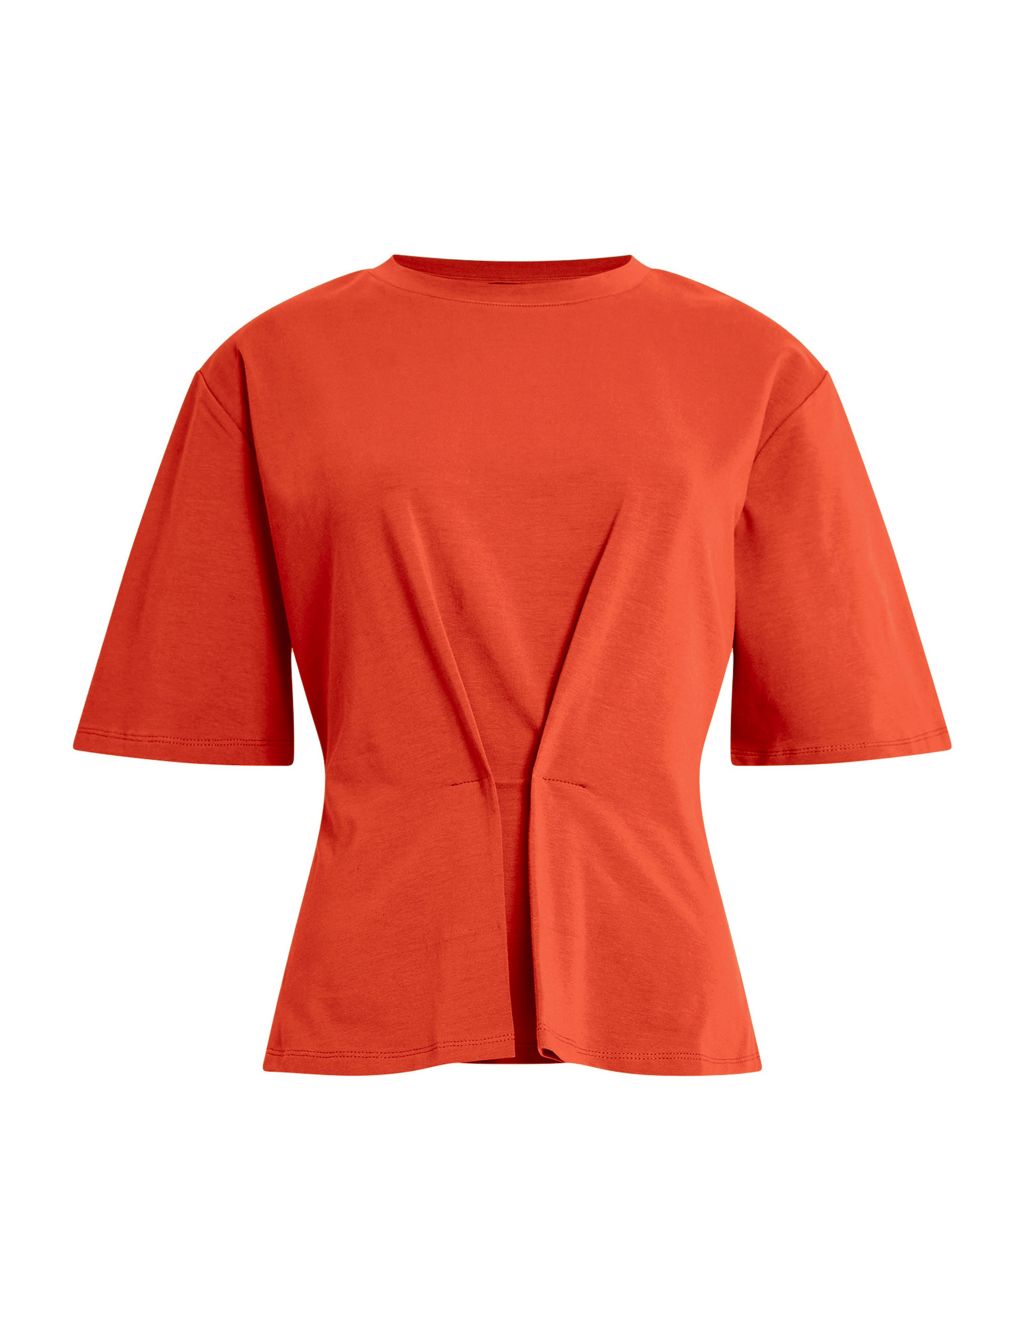 Cotton Rich Relaxed Peplum Top image 2